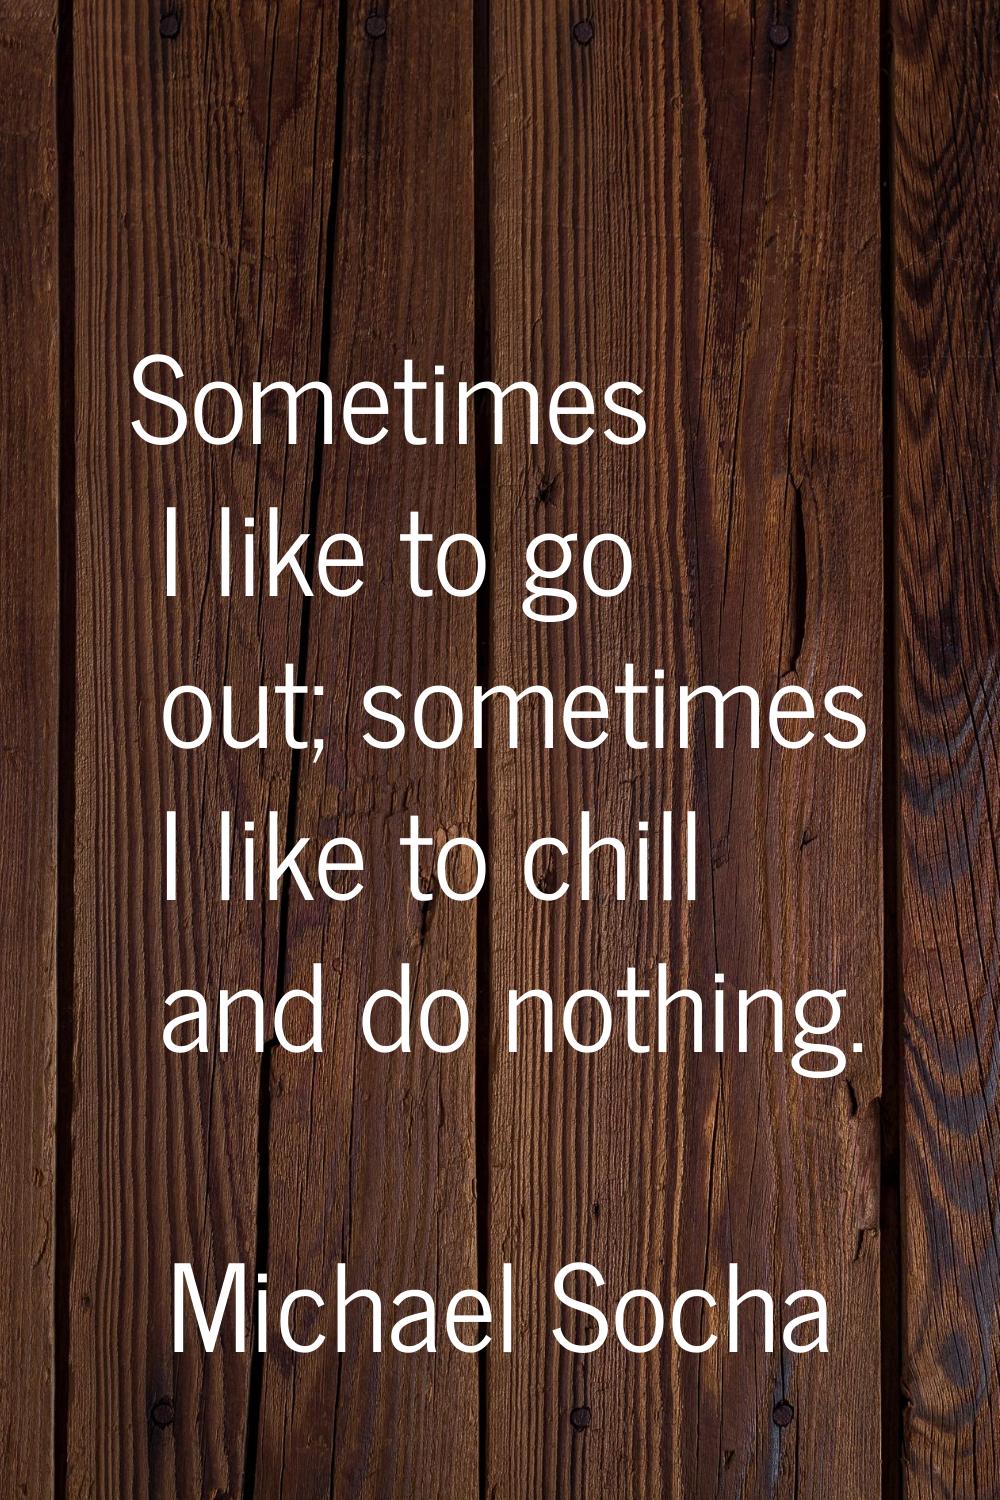 Sometimes I like to go out; sometimes I like to chill and do nothing.